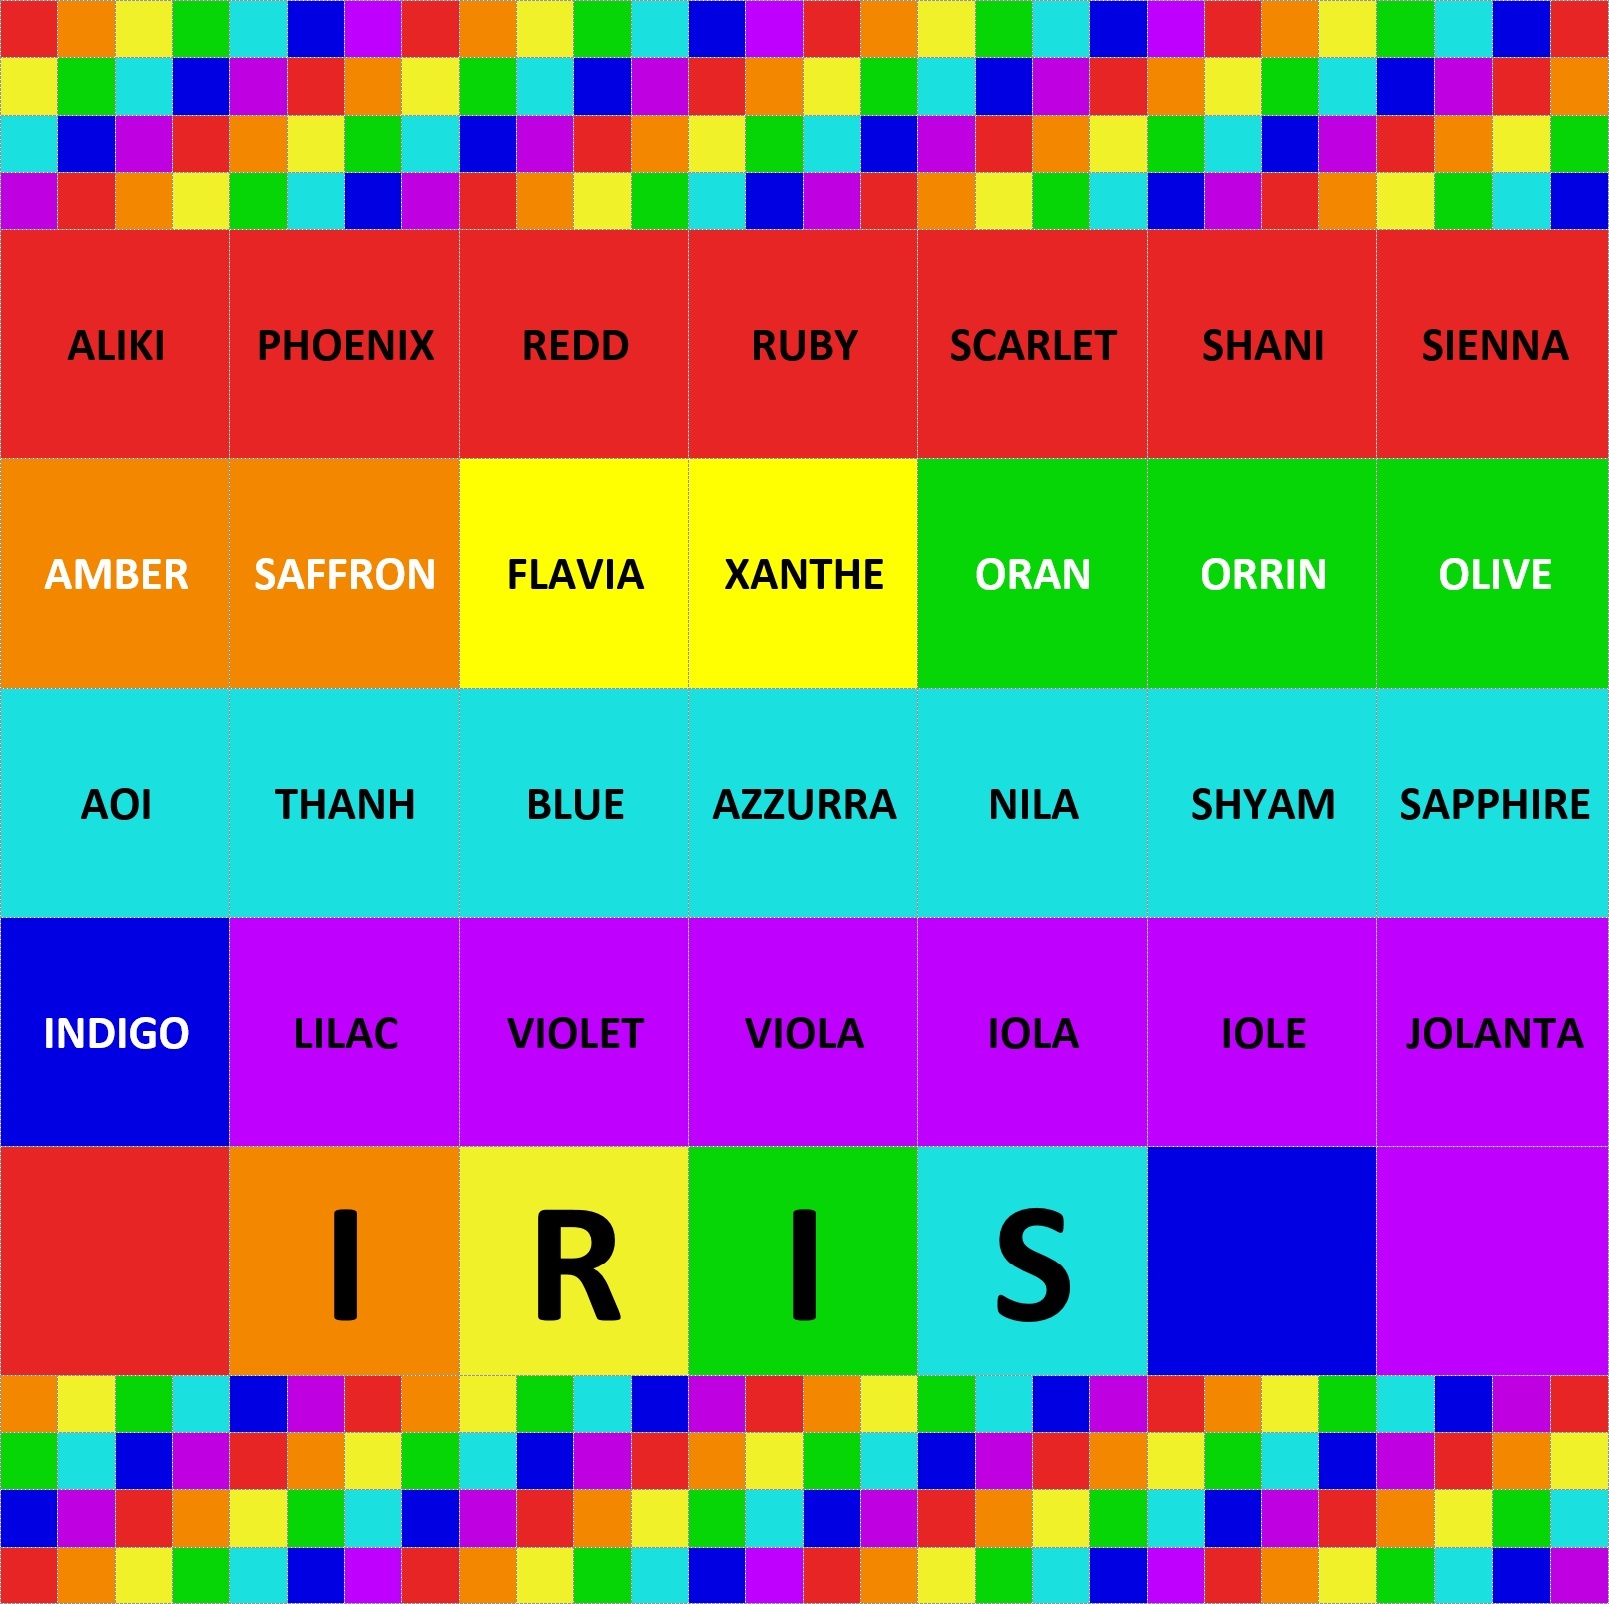 A list of names inspired by the colours of the rainbow are displayed on a background made up of the colours of the rainbow. The names inspired by the colour red are Aliki, Phoenix, Redd, Ruby, Scarlet, Shani, and Sienna. The names inspired by the colour orange are Amber and Saffron. The names inspired by the colour yellow are Flavia and Xanthe. The names inspired by the colour green are Oran, Orrin, and Olive. The names inspired by the colour blue are Aoi, Thanh, Blue, Azzurra, Nila, Shyam, and Sapphire. The name inspired by the colour indigo is Indigo. The names inspired by the colour violet are Lilac, Violet, Viola, Iola, Iole, and Jolanta. The list finishes with the name Iris, which means rainbow. 